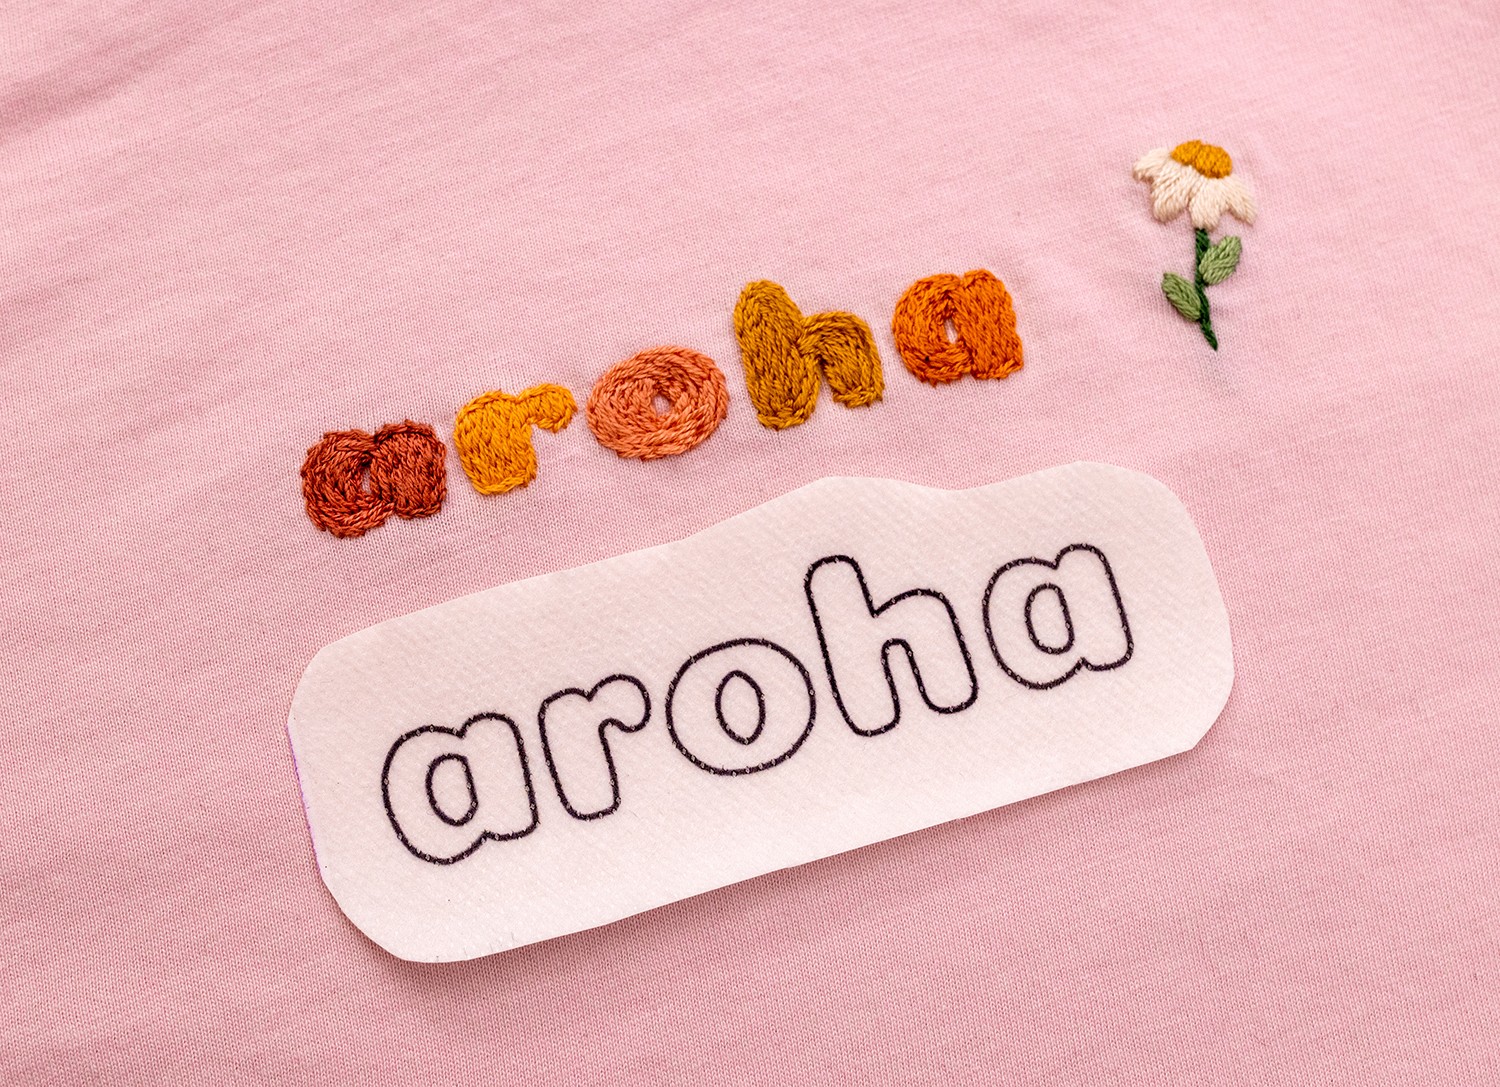 'Aroha' and a flower is stitched on a shirt.